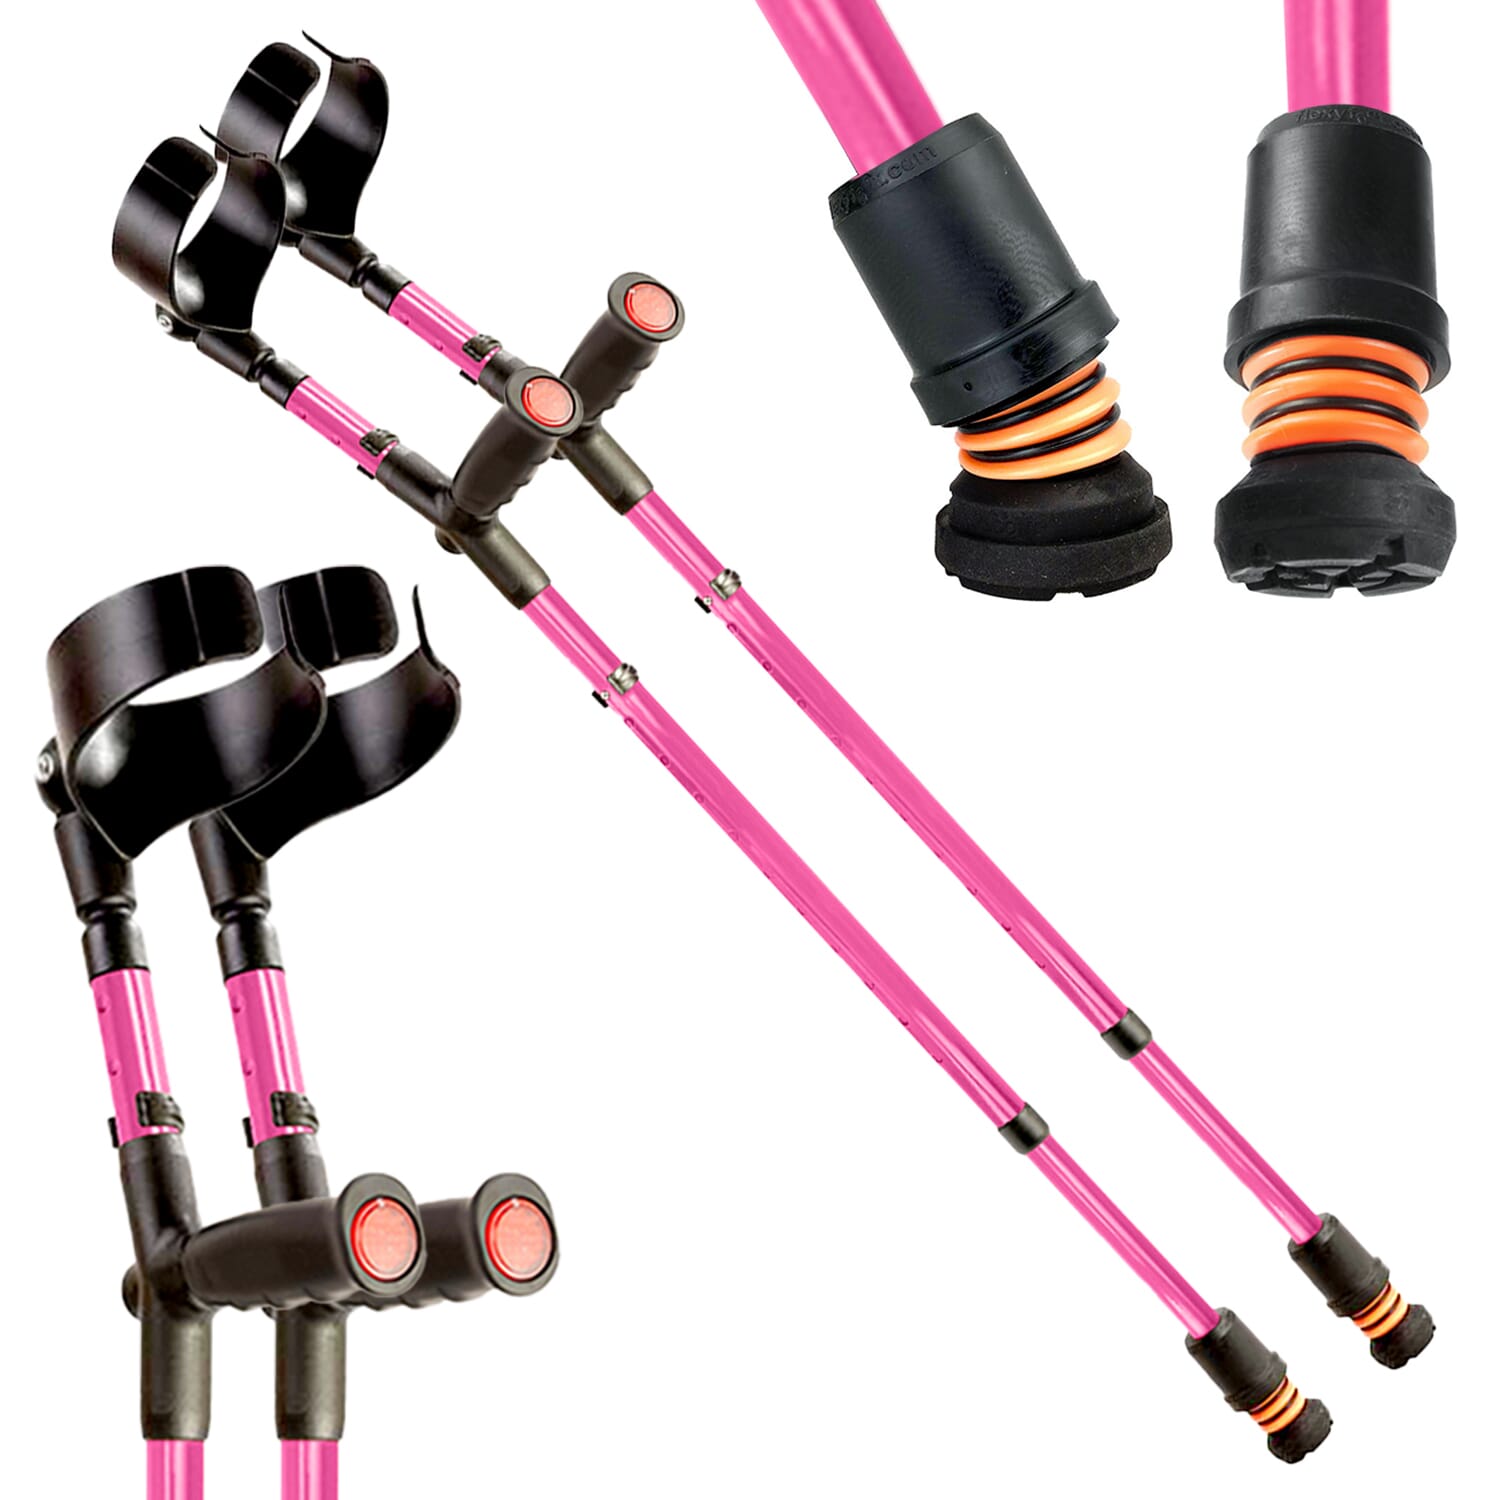 View Flexyfoot Soft Grip Double Adjustable Crutches Pink Pair information